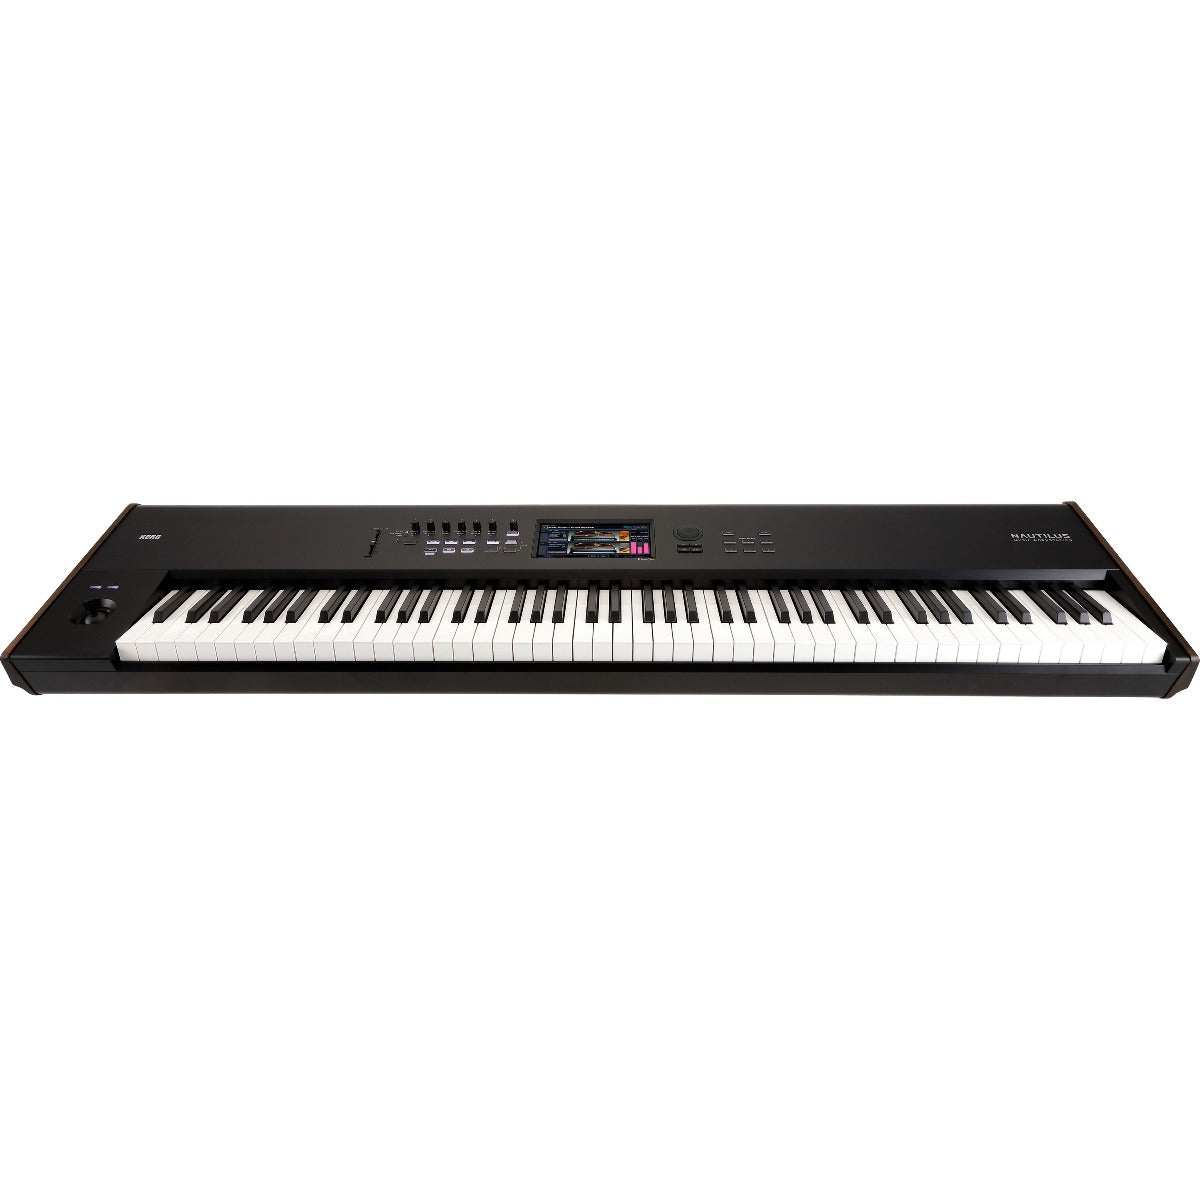 Perspective view of Korg Nautilus 88-Key Music Workstation showing top and front